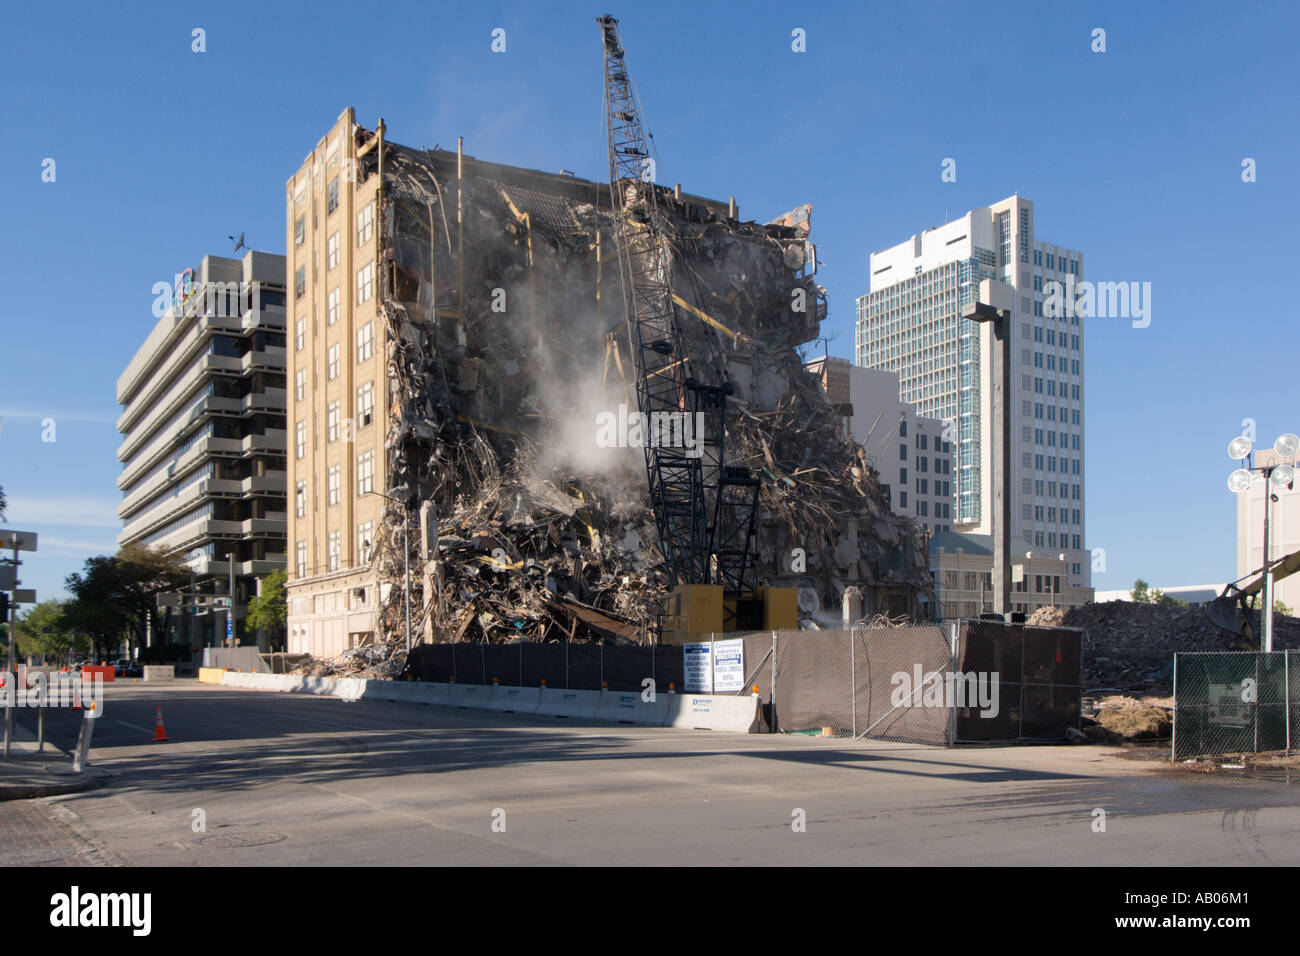 Demolition of Highrise Office Building in Downtown Tampa, FL Stock Photo